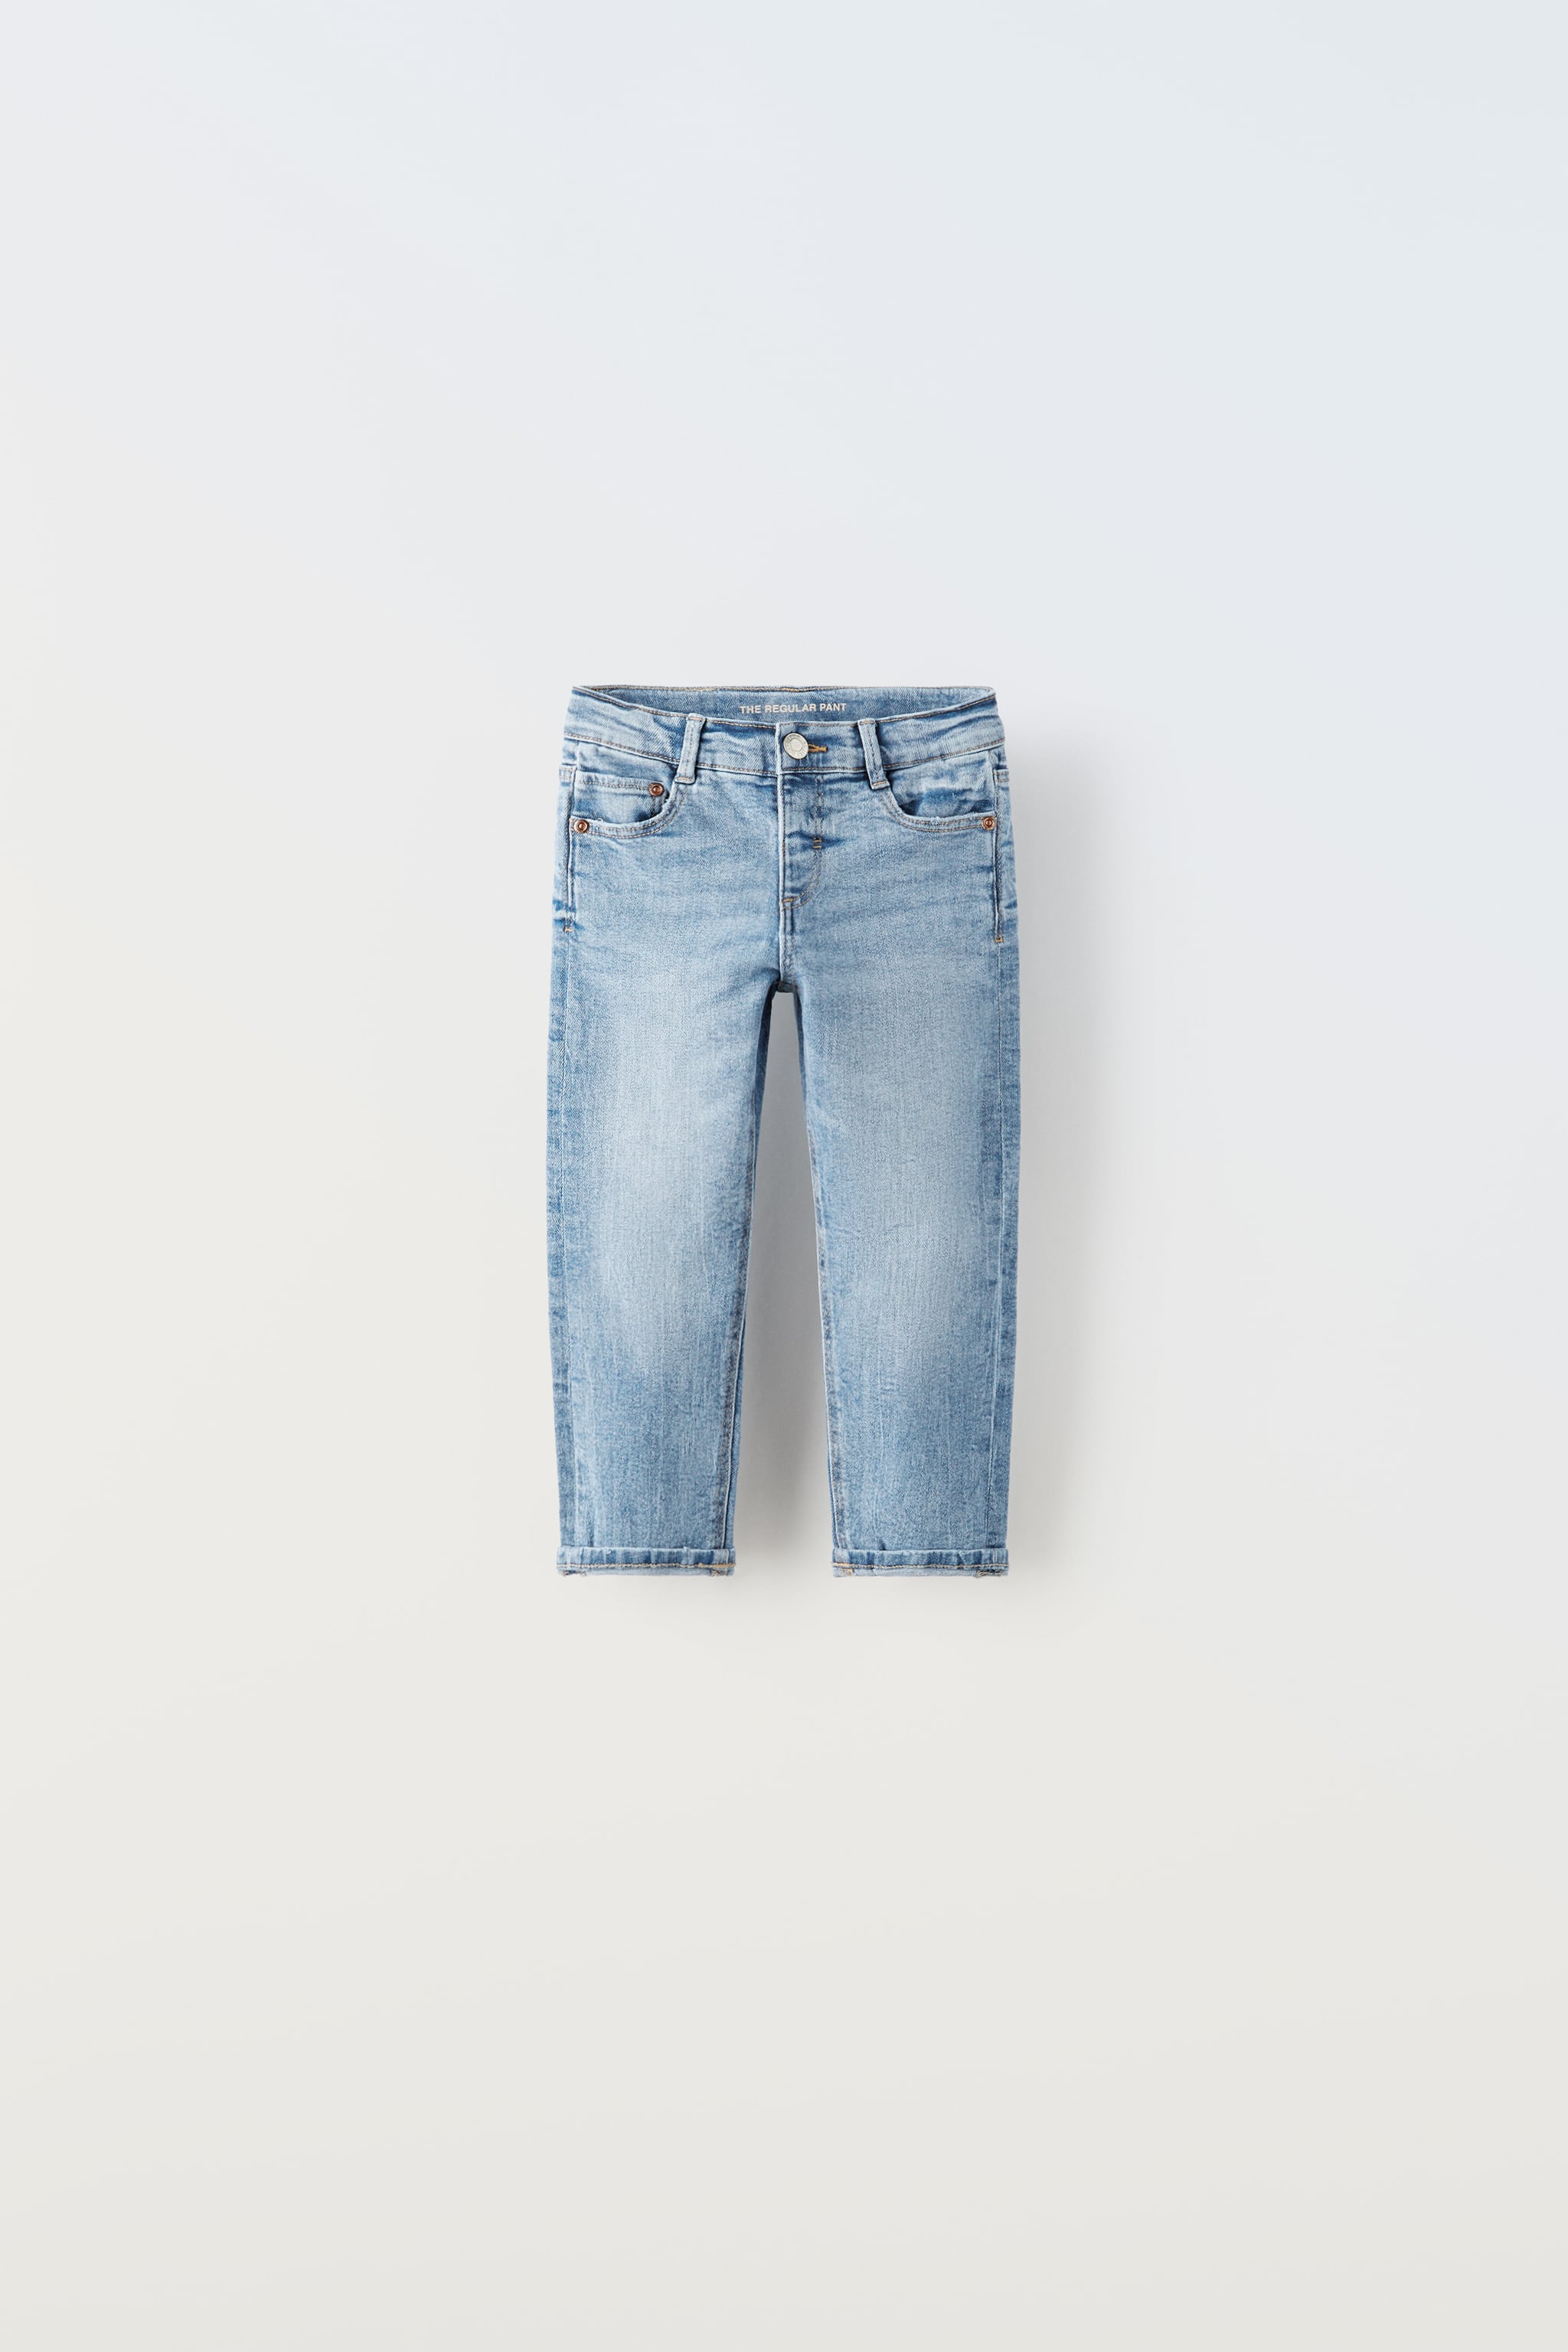 THE REGULAR FIT JEANS